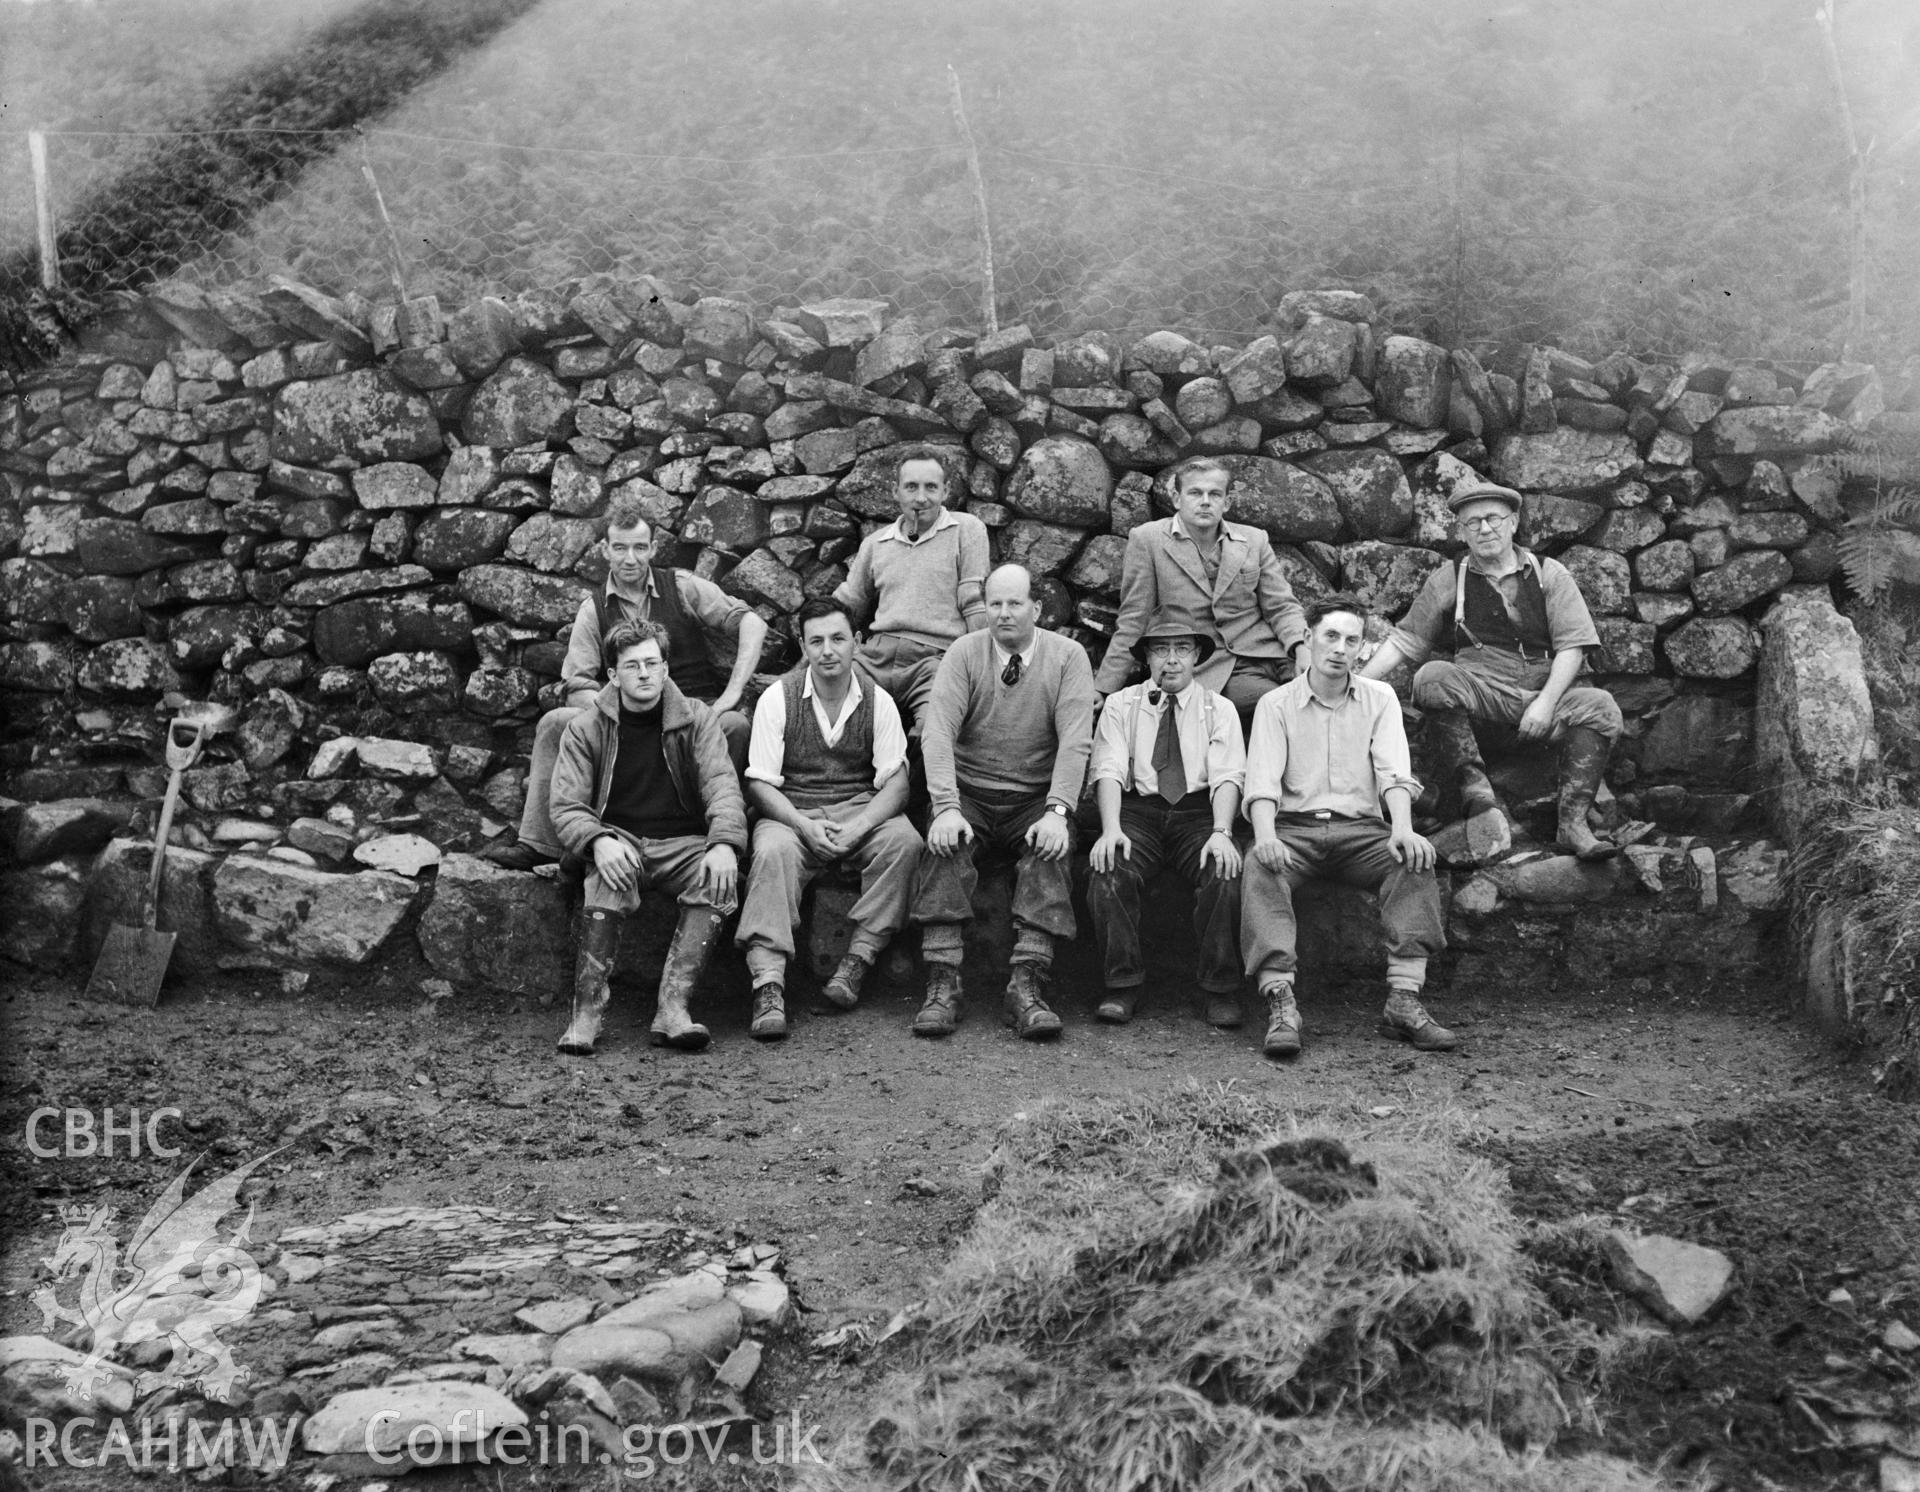 The Cefn y Fan excavation team of 1953, including W.E. Griffiths, Peter Smith, C.H. Houlder A.H.A. Hogg, F.P. Jowett and a figure believed to be the Mayor of Porthmadog.